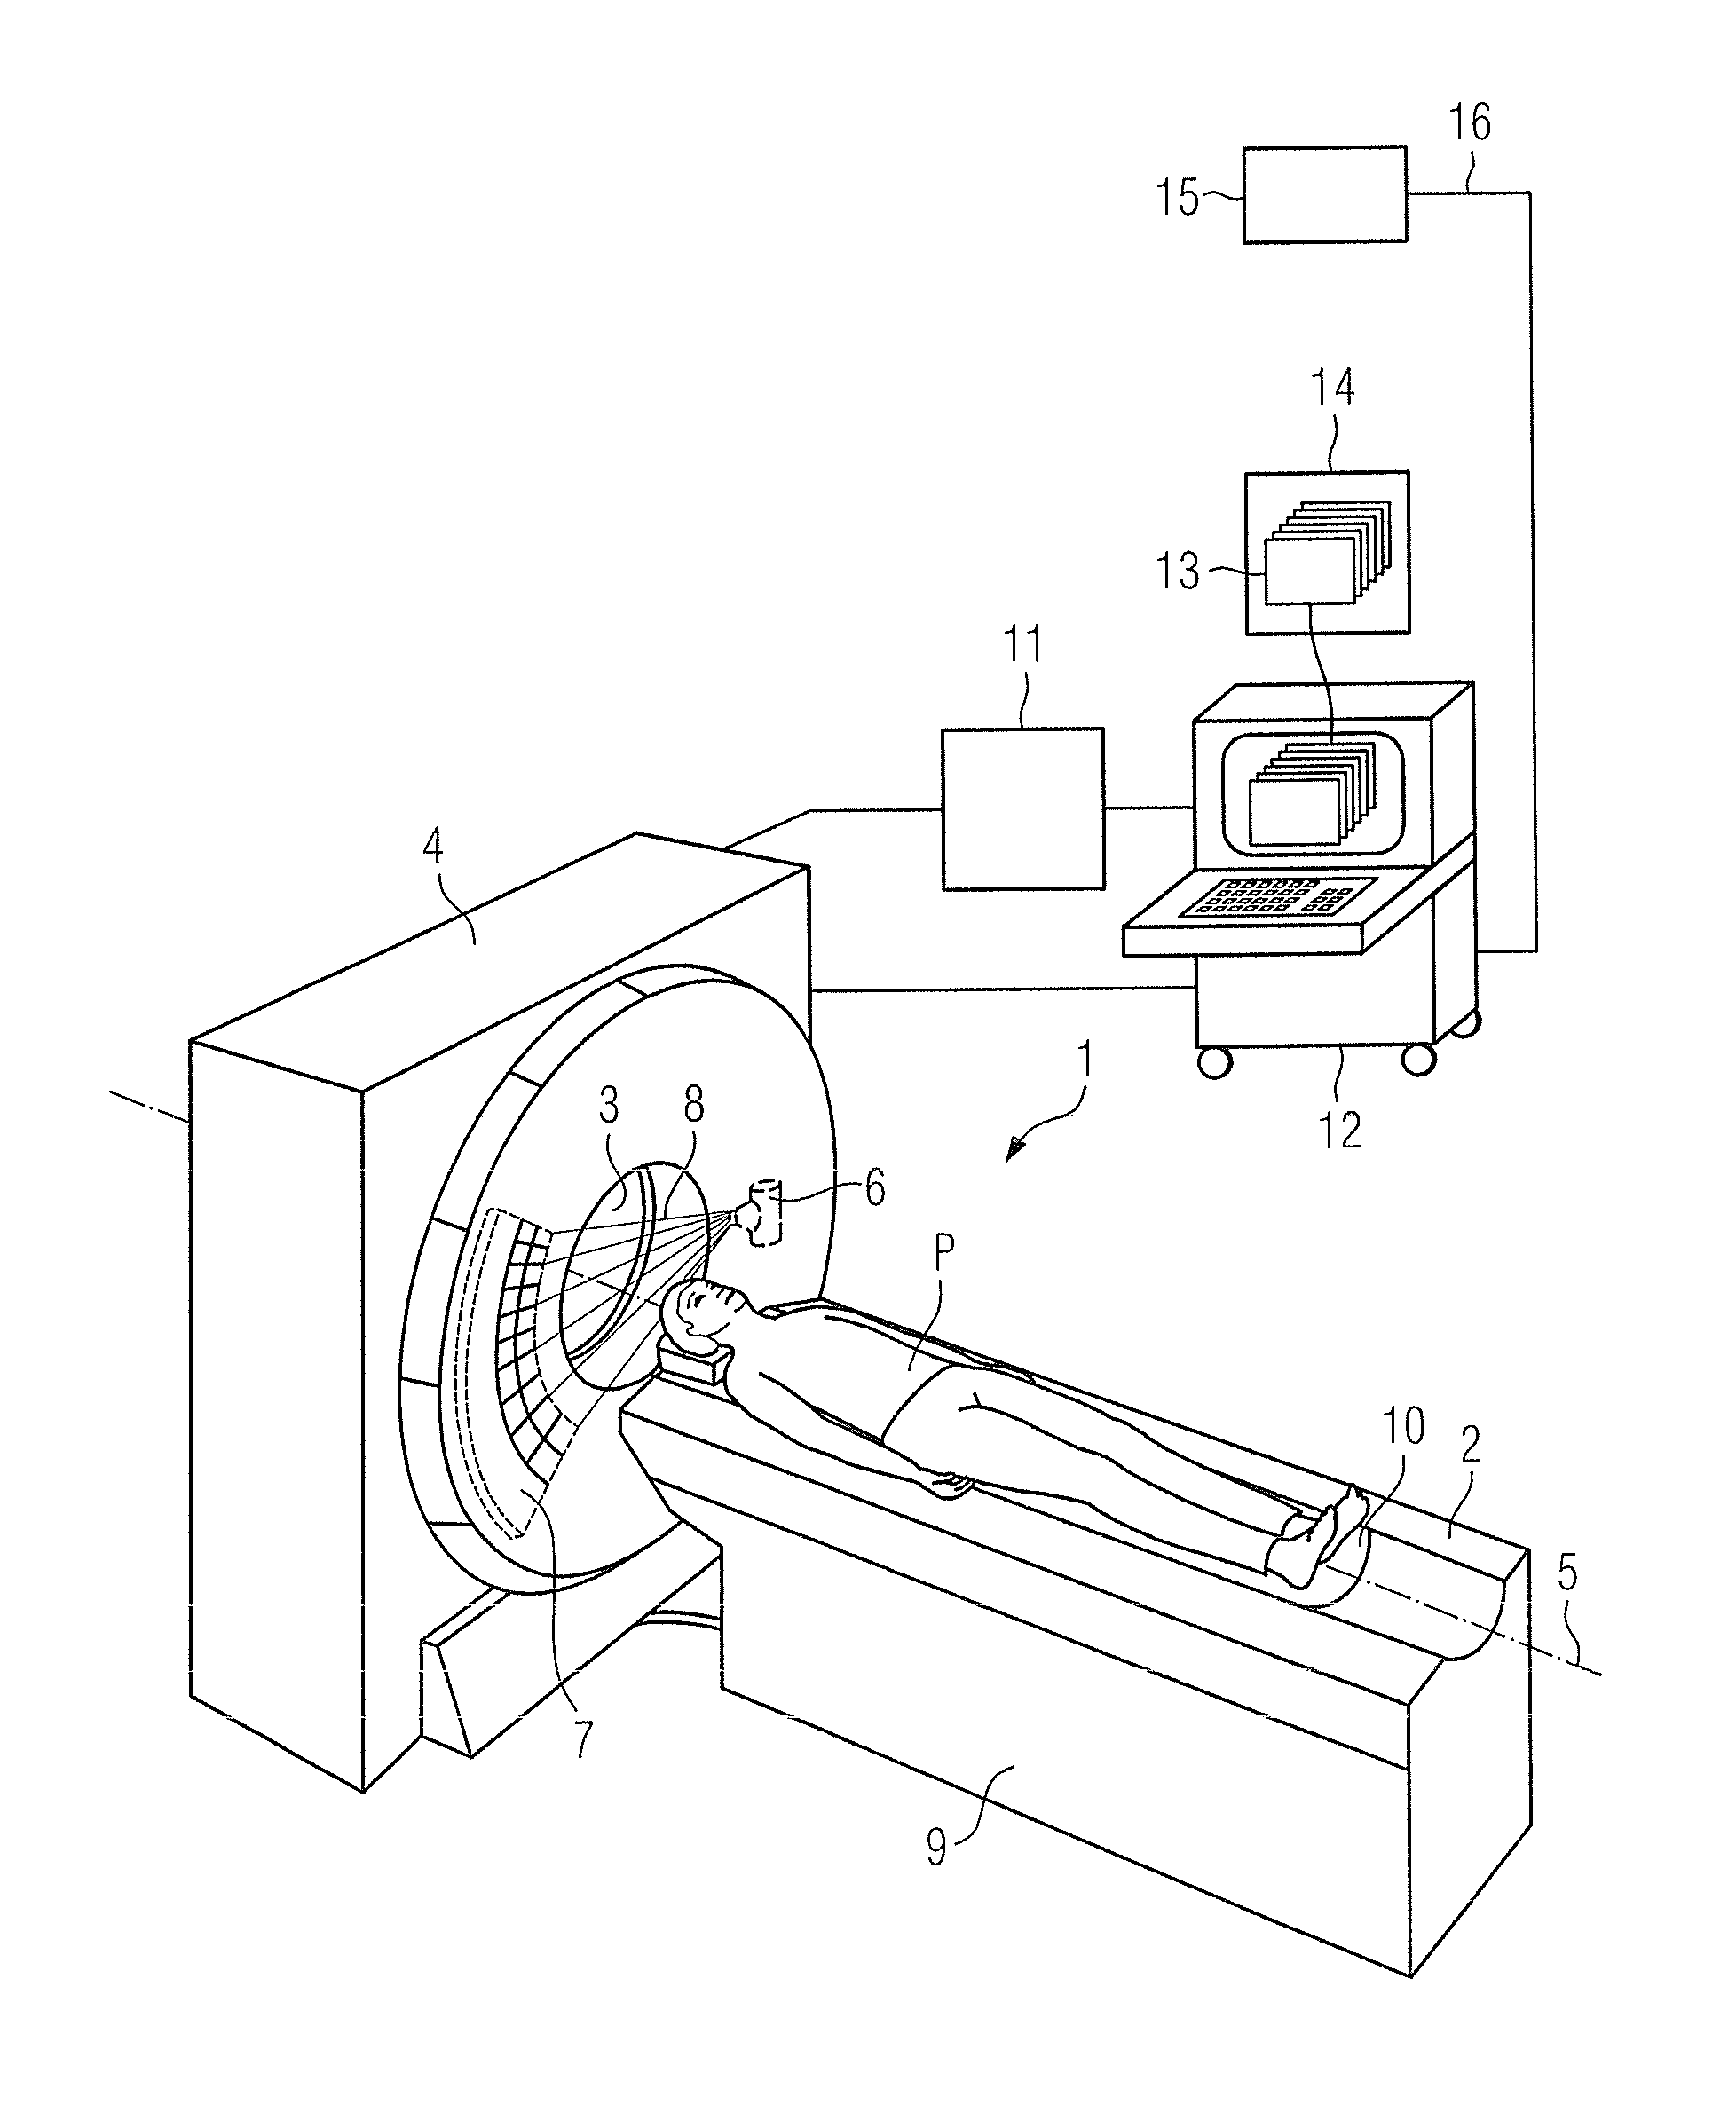 Method and device to assist in dose reduction of X-ray radiation applied to a patient